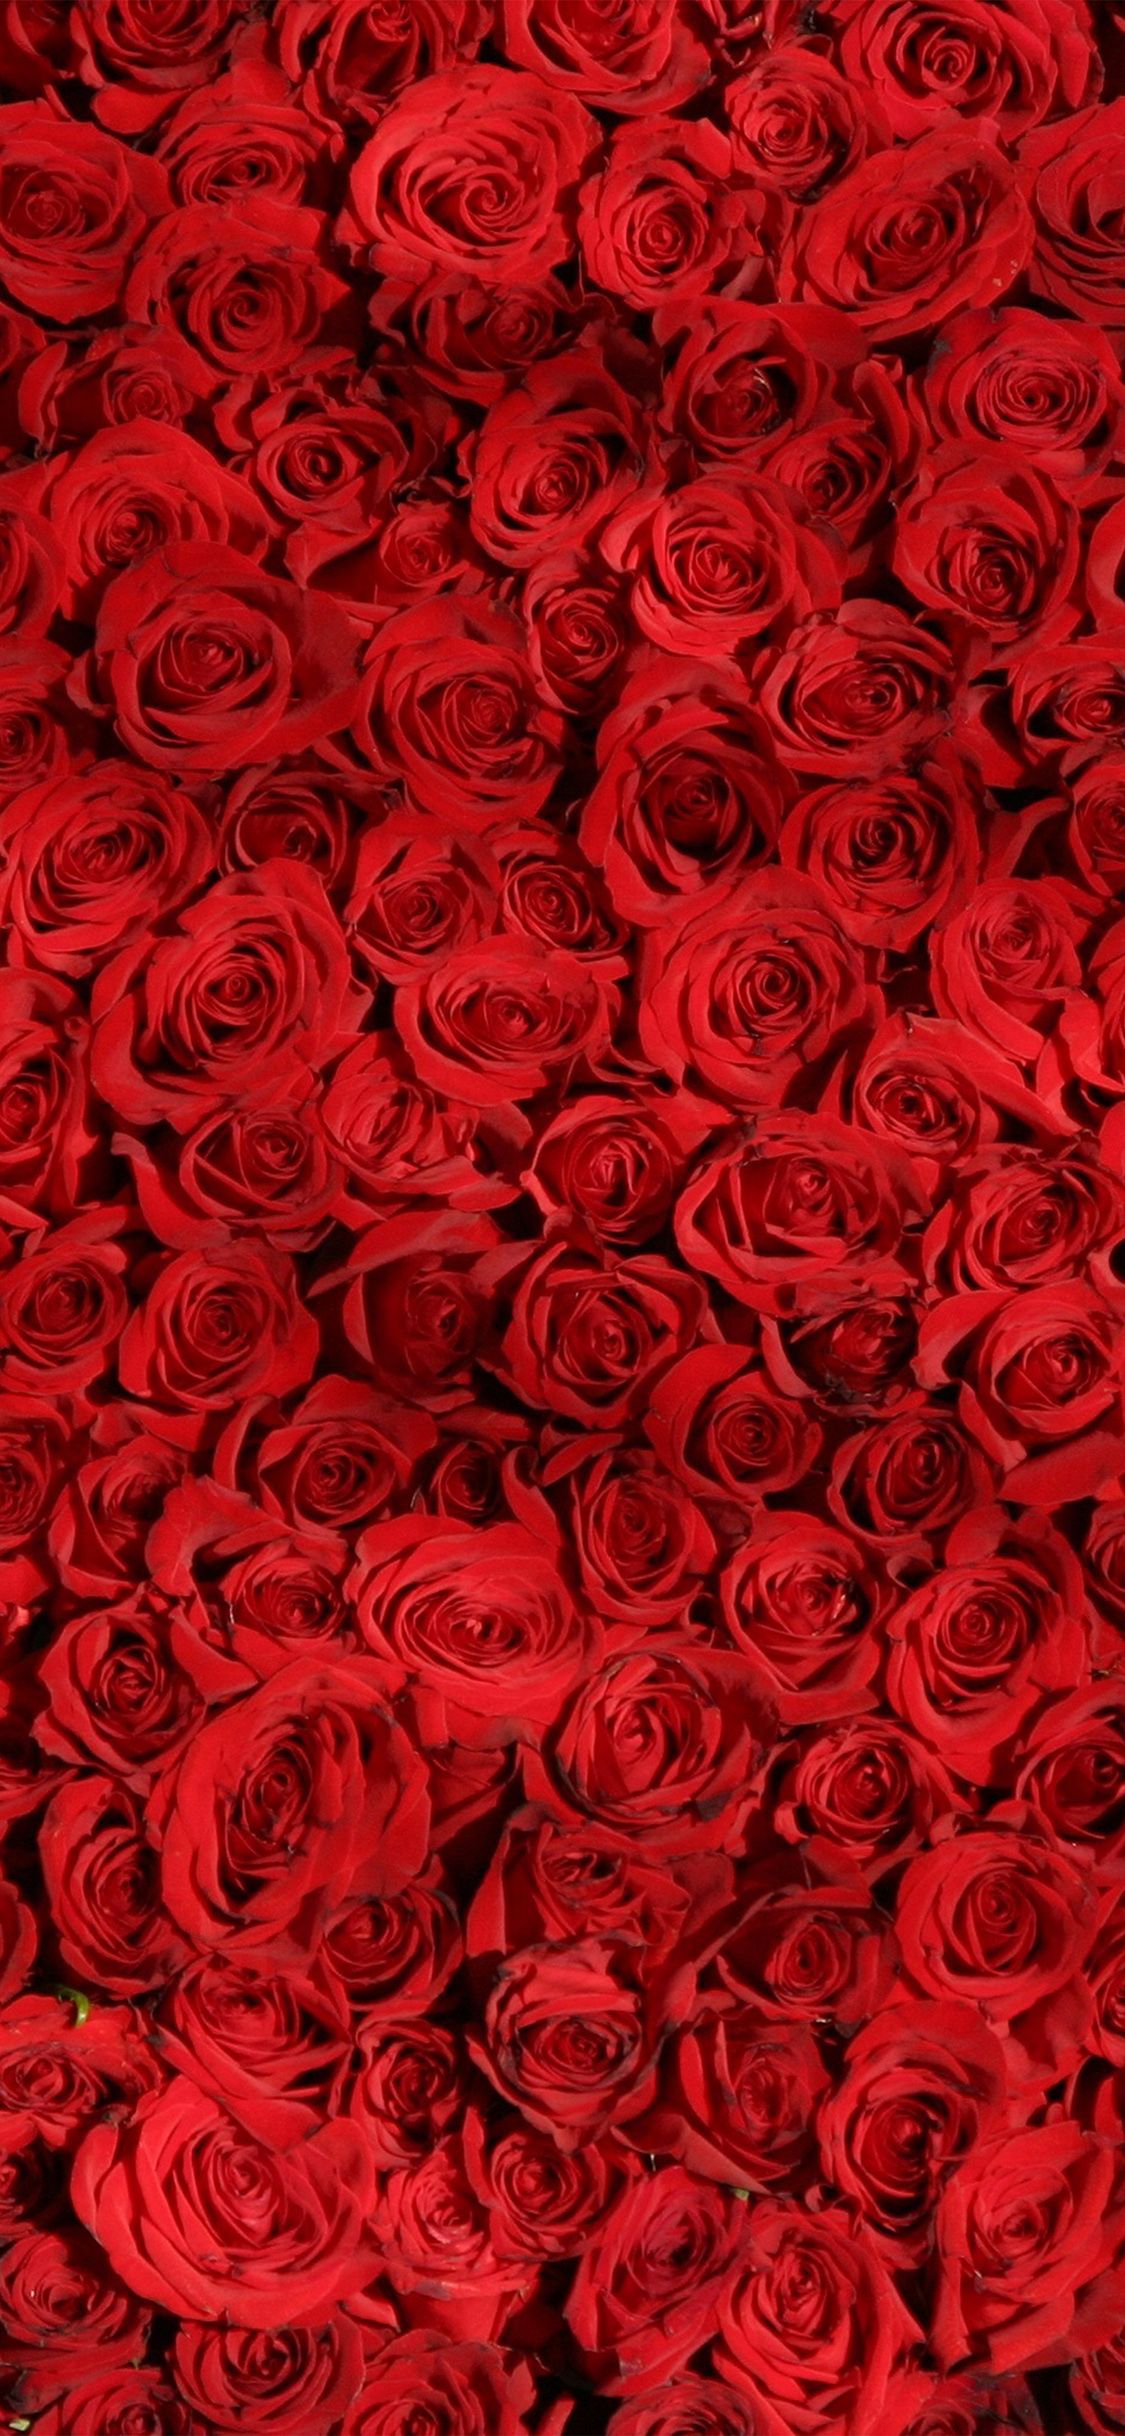 iPhone X wallpaper. rose red pattern flower